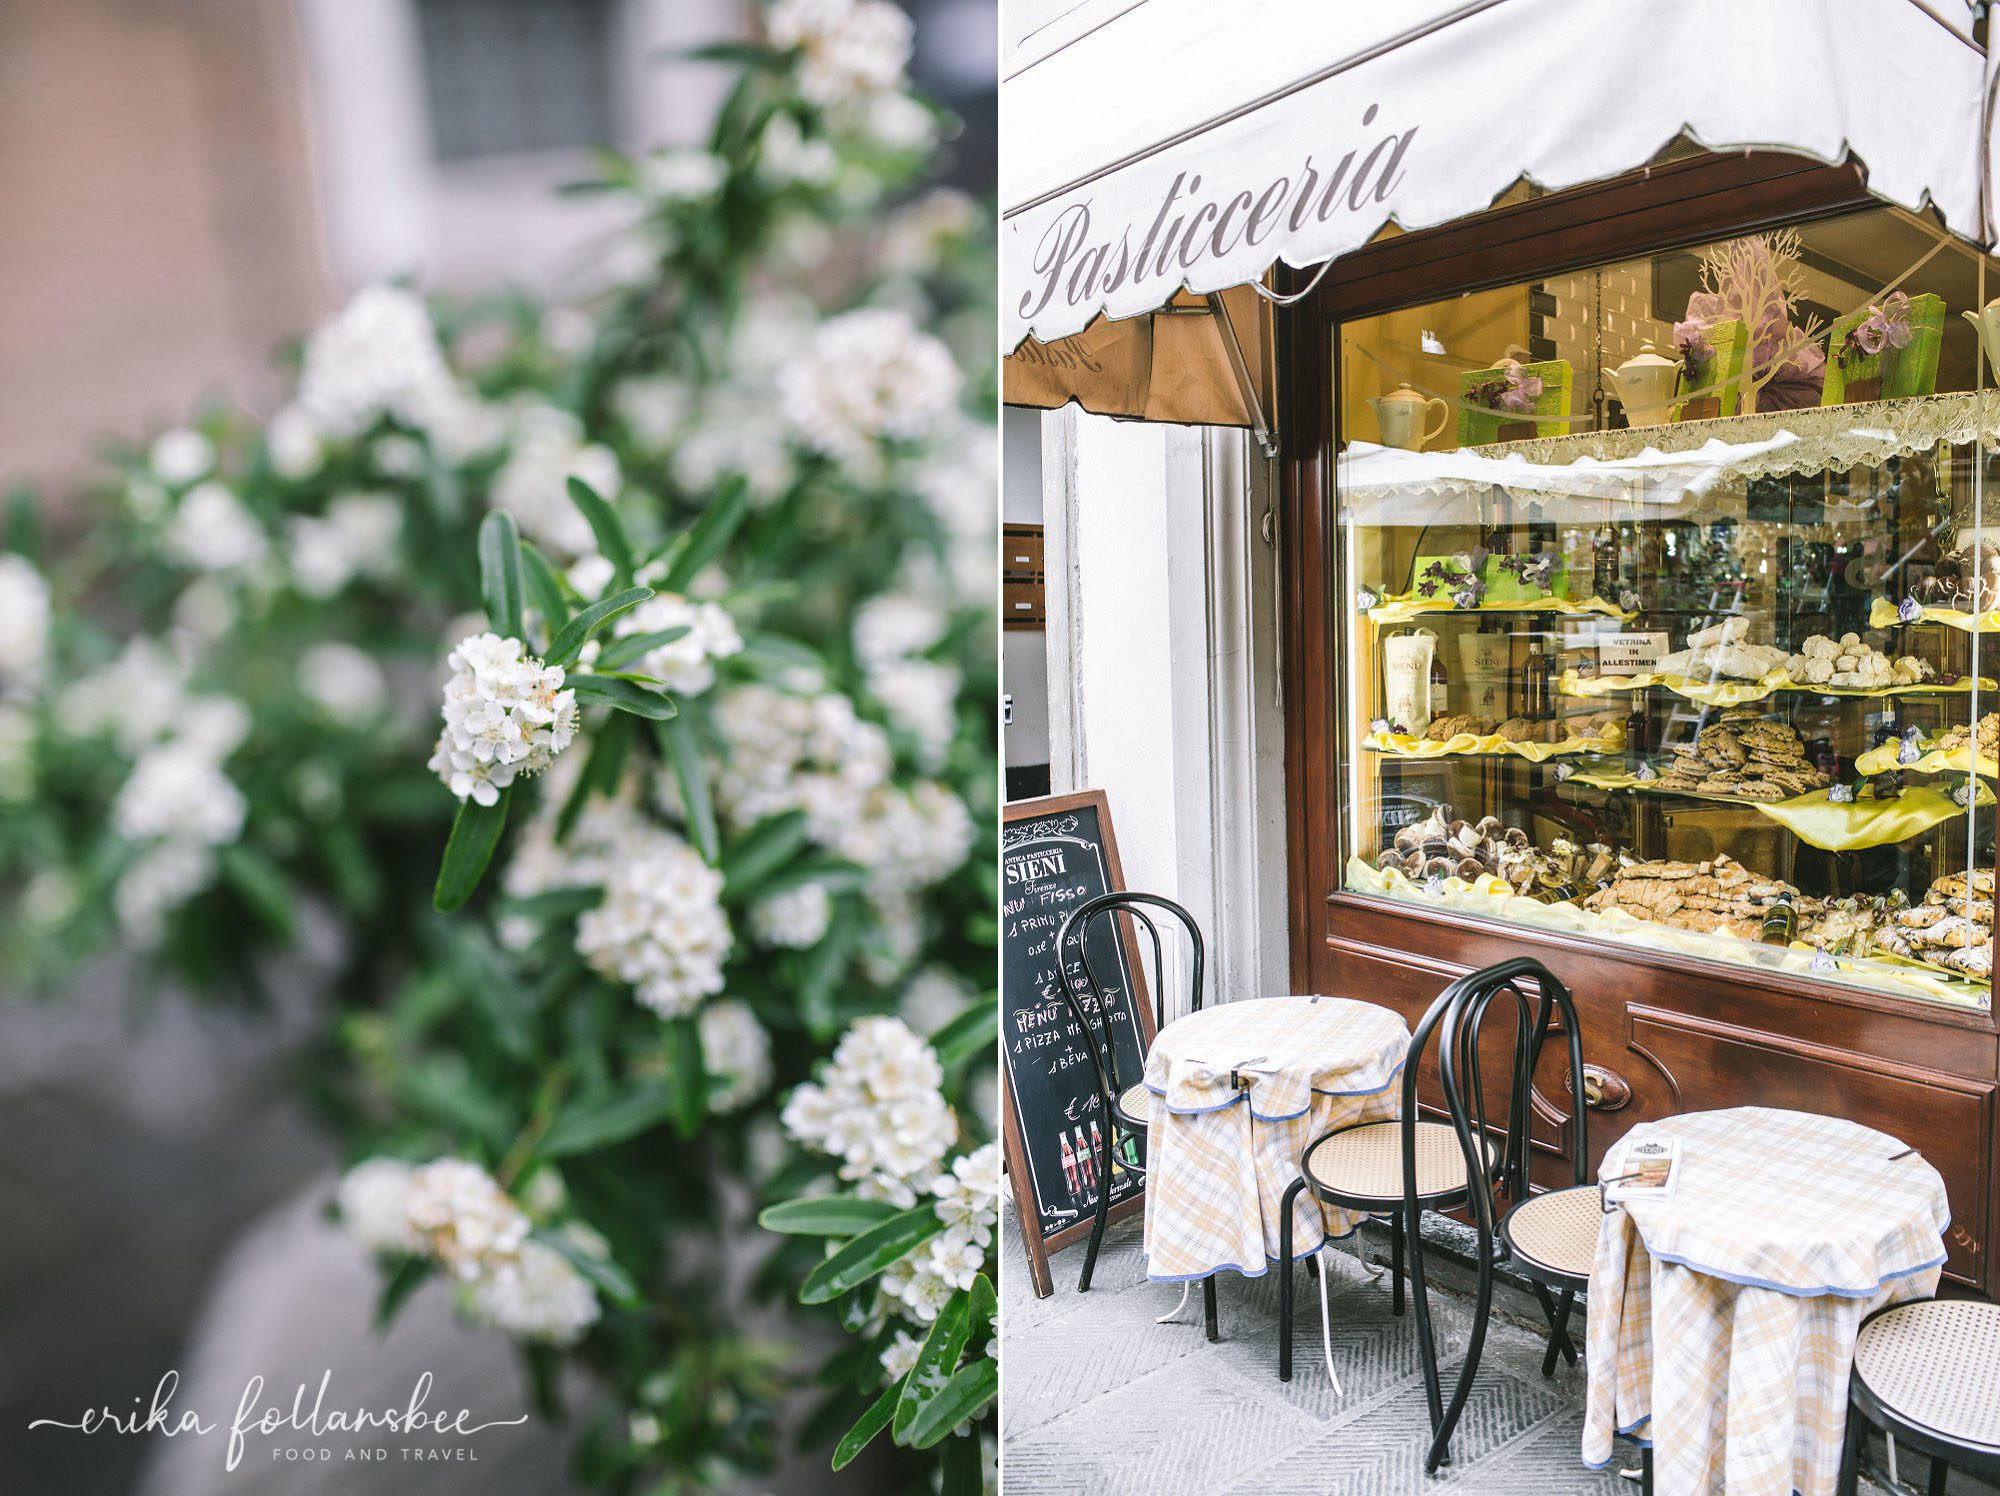 Beautiful Pasticceria in Florence, Italy